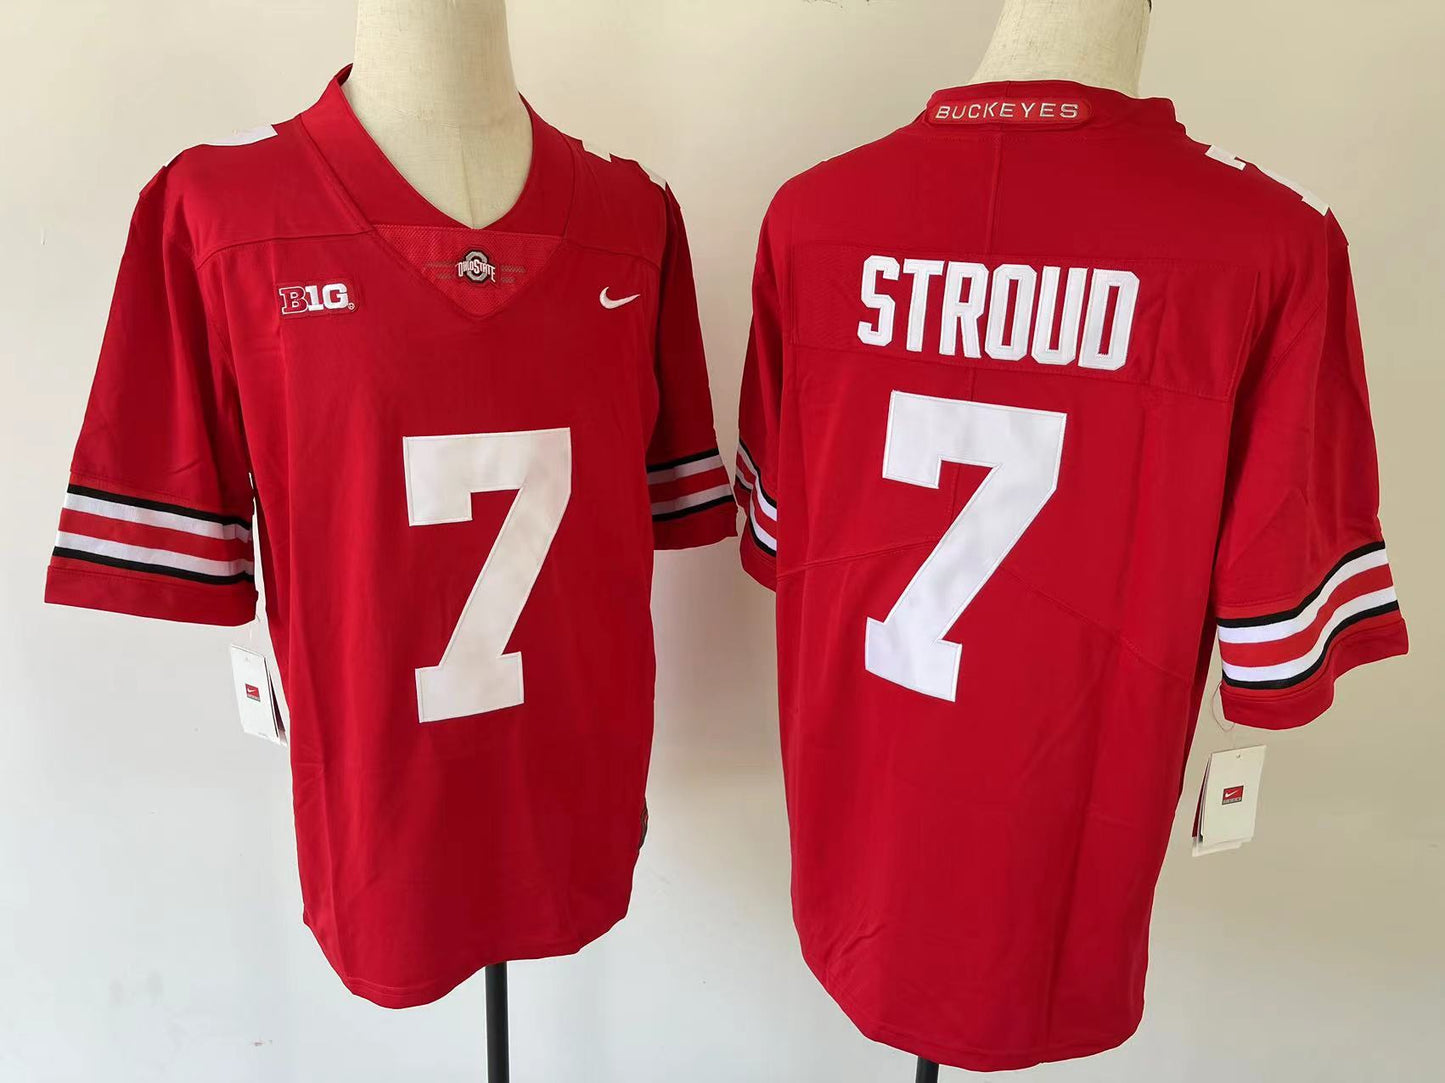 Ohio State Buckeyes C.J Stroud Nike NCAA Campus Legend Home College Football Jersey - Red